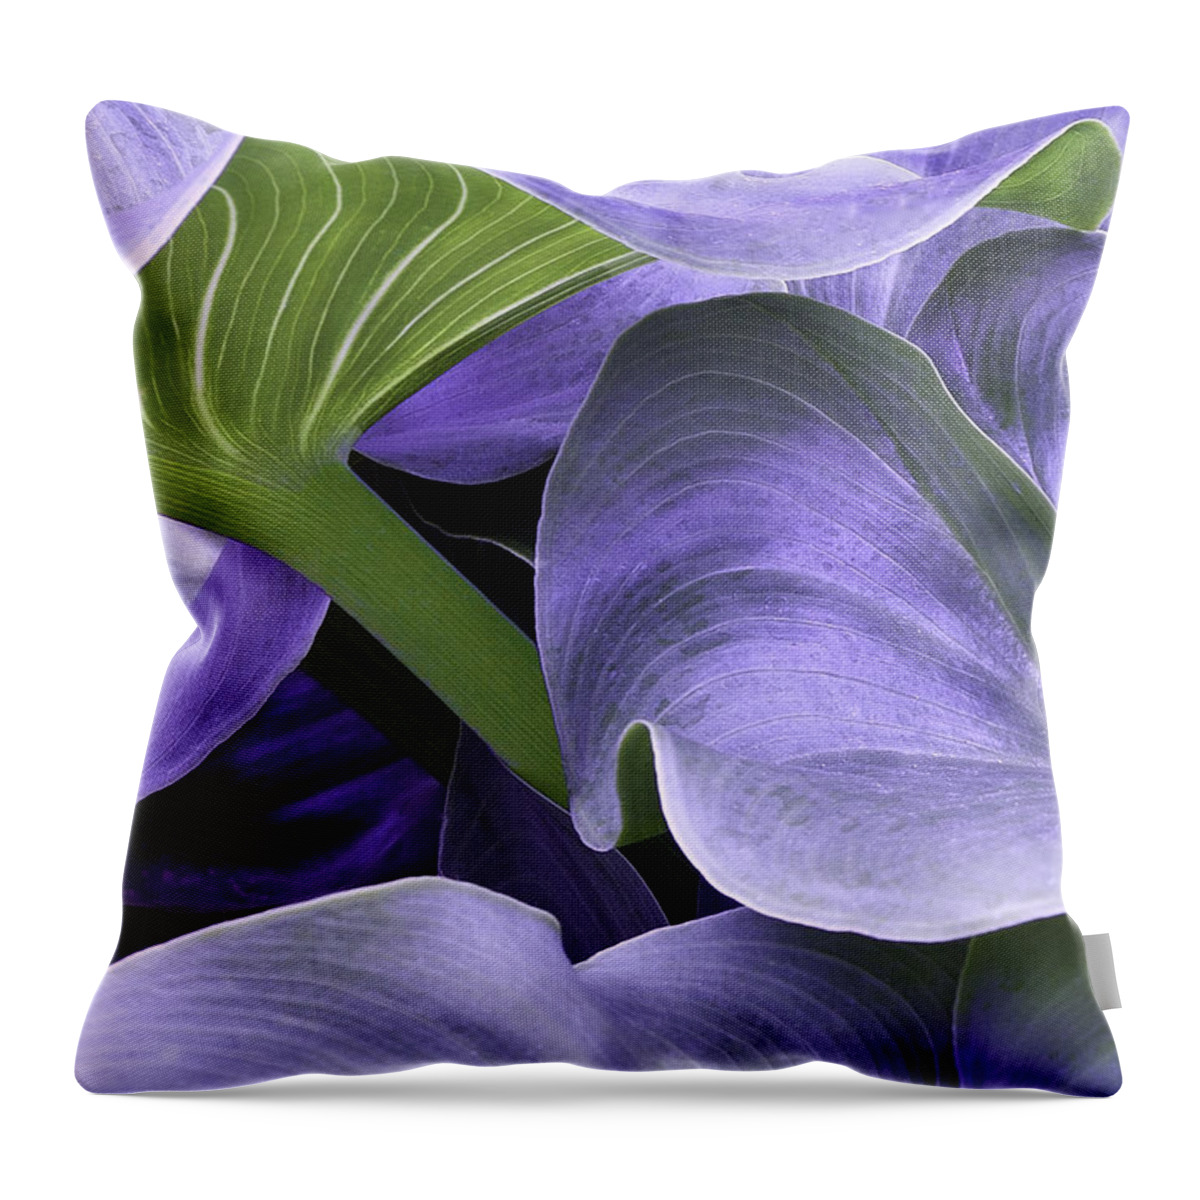 Calla Lily Throw Pillow featuring the photograph Purple Calla Lily Bush by Richard J Thompson